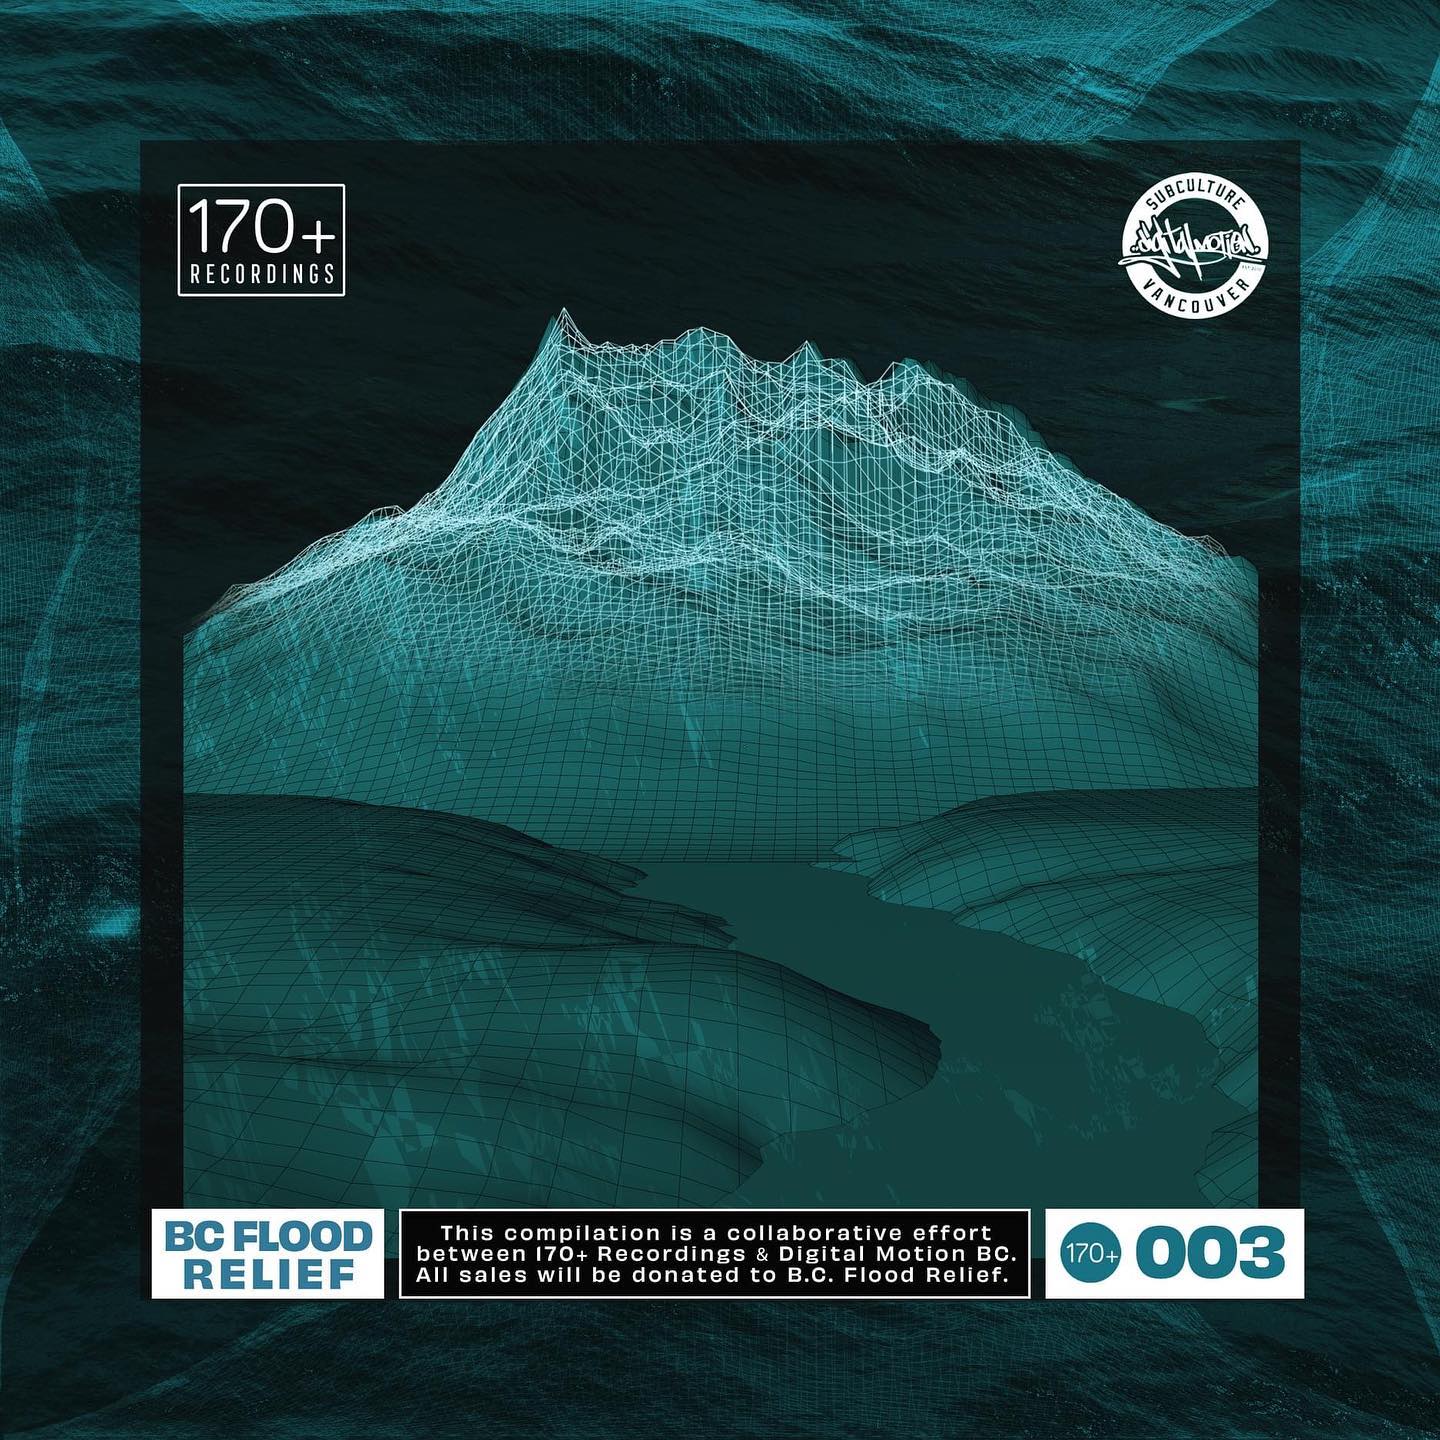 Seasons greetings! We're proud to announce that we've joined forces with @170plusrecs to release the 'BC Flood Relief LP'. This 23 track various artist #DnB music compilation will be out on Jan 5th 2022 - 100% of the proceeds from this release will be donated to local charities here in B.C. that are supporting the flood initiatives. We've got together some really awesome B.C. producers as well as DnB producers from all parts of the world for this release. Big thanks to everyone checking out the project and supporting it by donating / purchasing the music. We hope you enjoy the tunes! LINK IN OUR BIO for the pre order. 🔊💯🇨🇦🌎🎶❤️💧